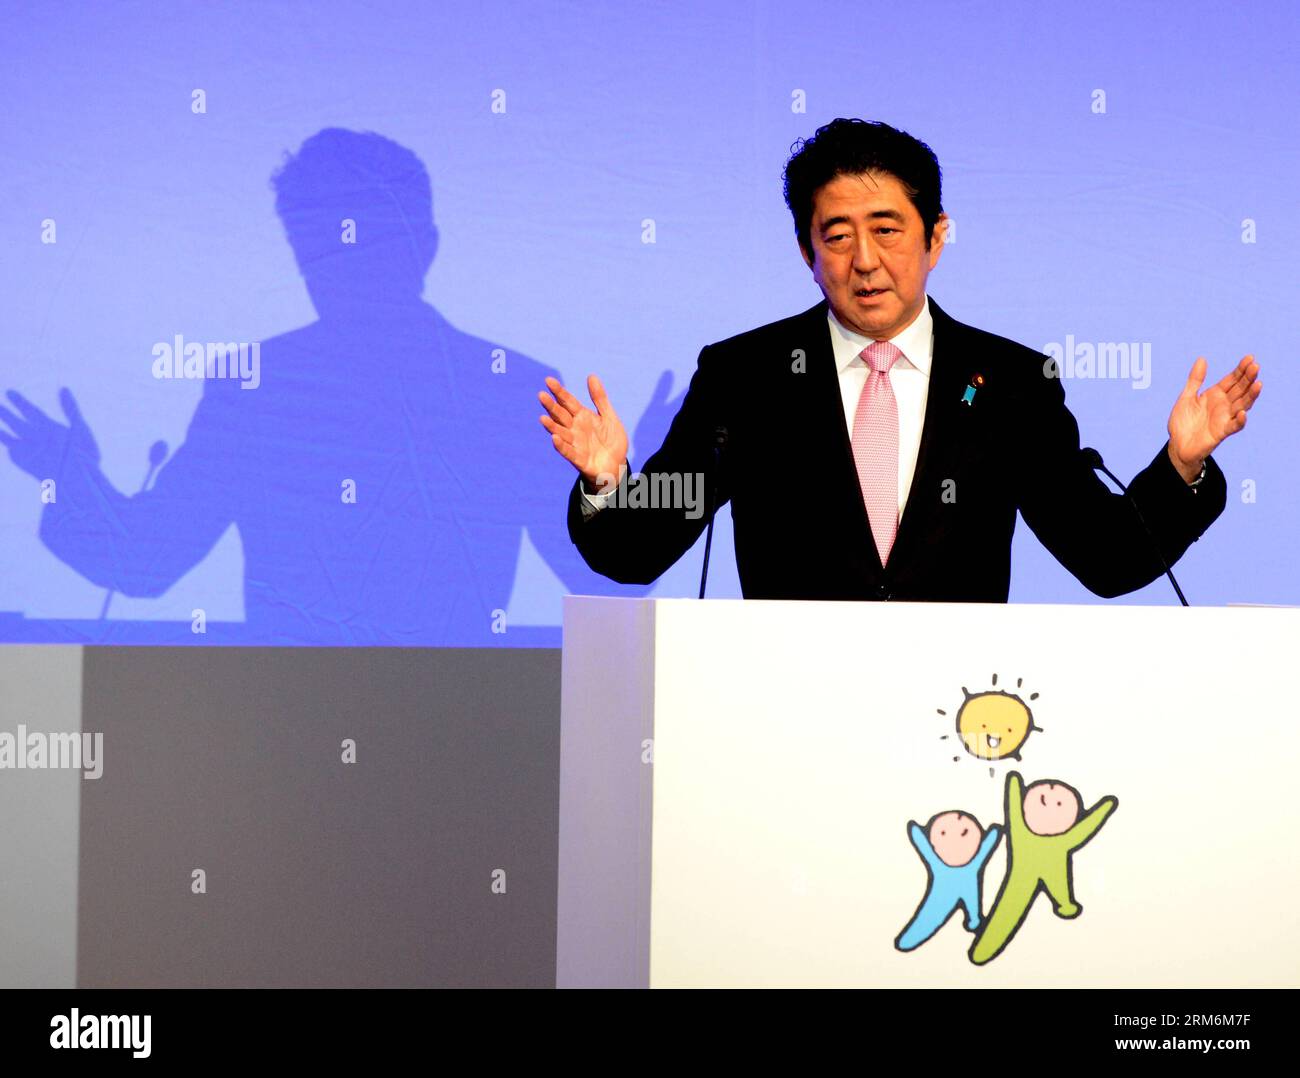 (140119) -- TOKYO, Jan. 19, 2014 (Xinhua) -- Shinzo Abe, Japanese Prime Minister and leader of the Liberal Democratic Party (LDP) speaks during the annual convention of the LDP in Tokyo, Japan, on Jan. 19, 2014. Japanese Prime Minister Shinzo Abe vowed Sunday to recover the country s economy by defeating prolonged deflation and create a virtuous cycle that would lead to wage increases. (Xinhua/Ma Ping) (srb) JAPAN-TOKYO-POLITICS-LDP-CONVENTION PUBLICATIONxNOTxINxCHN   Tokyo Jan 19 2014 XINHUA Shinzo ABE Japanese Prime Ministers and Leader of The Liberal Democratic Party LDP Speaks during The A Stock Photo